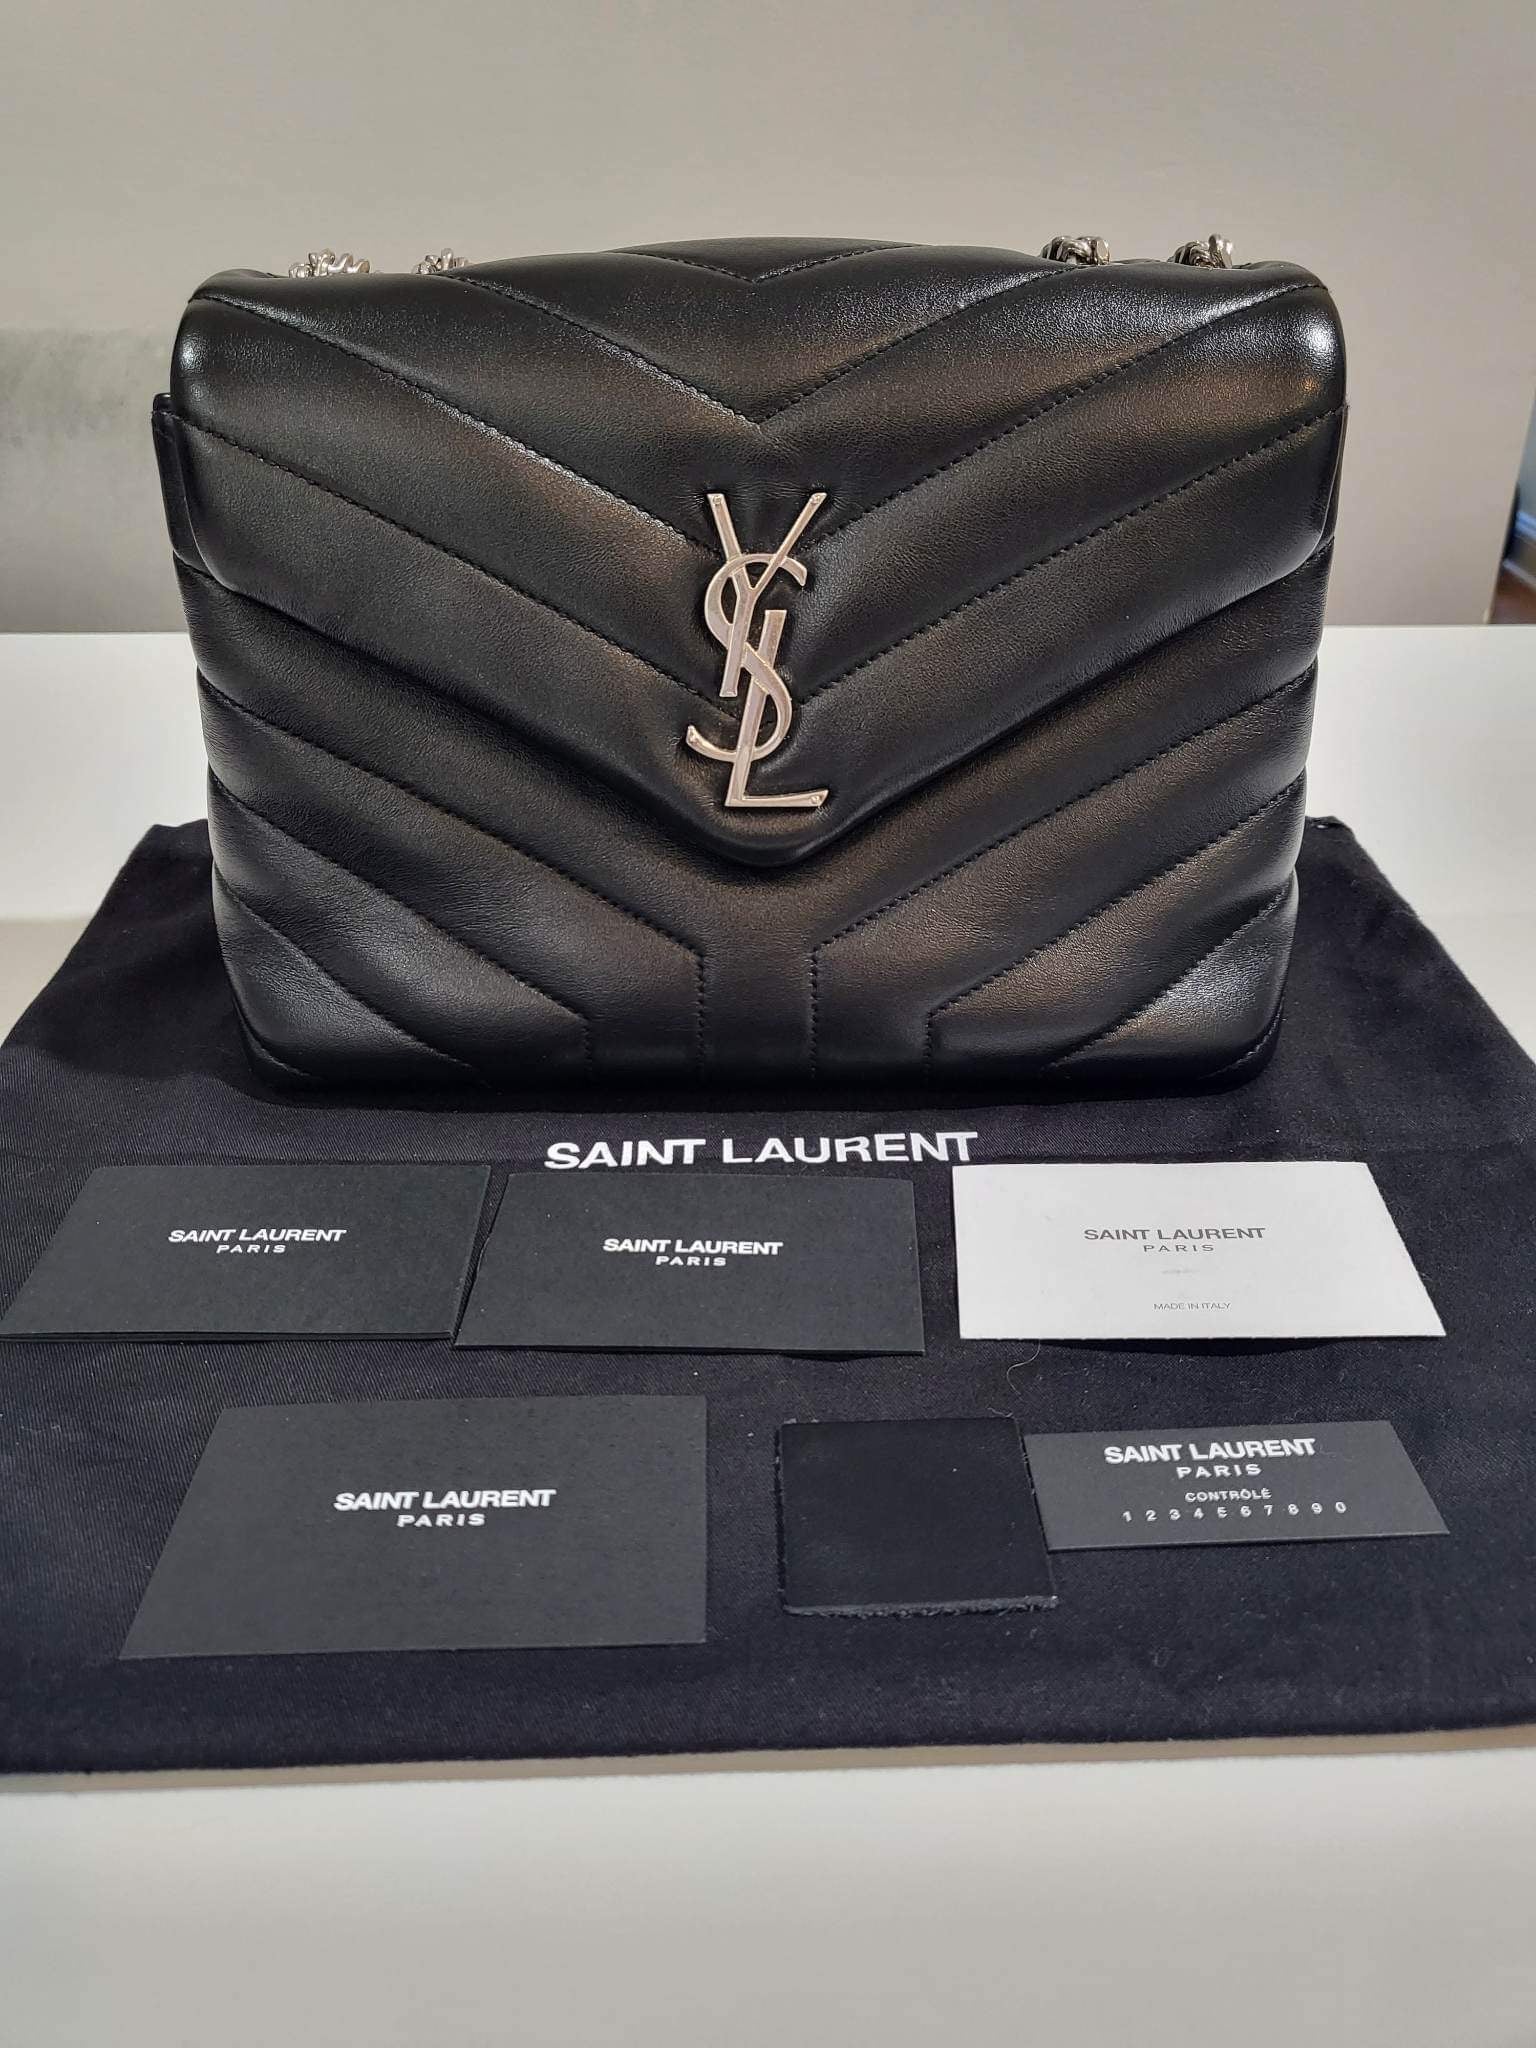 YSL LouLou medium with black hardware -- thoughts?